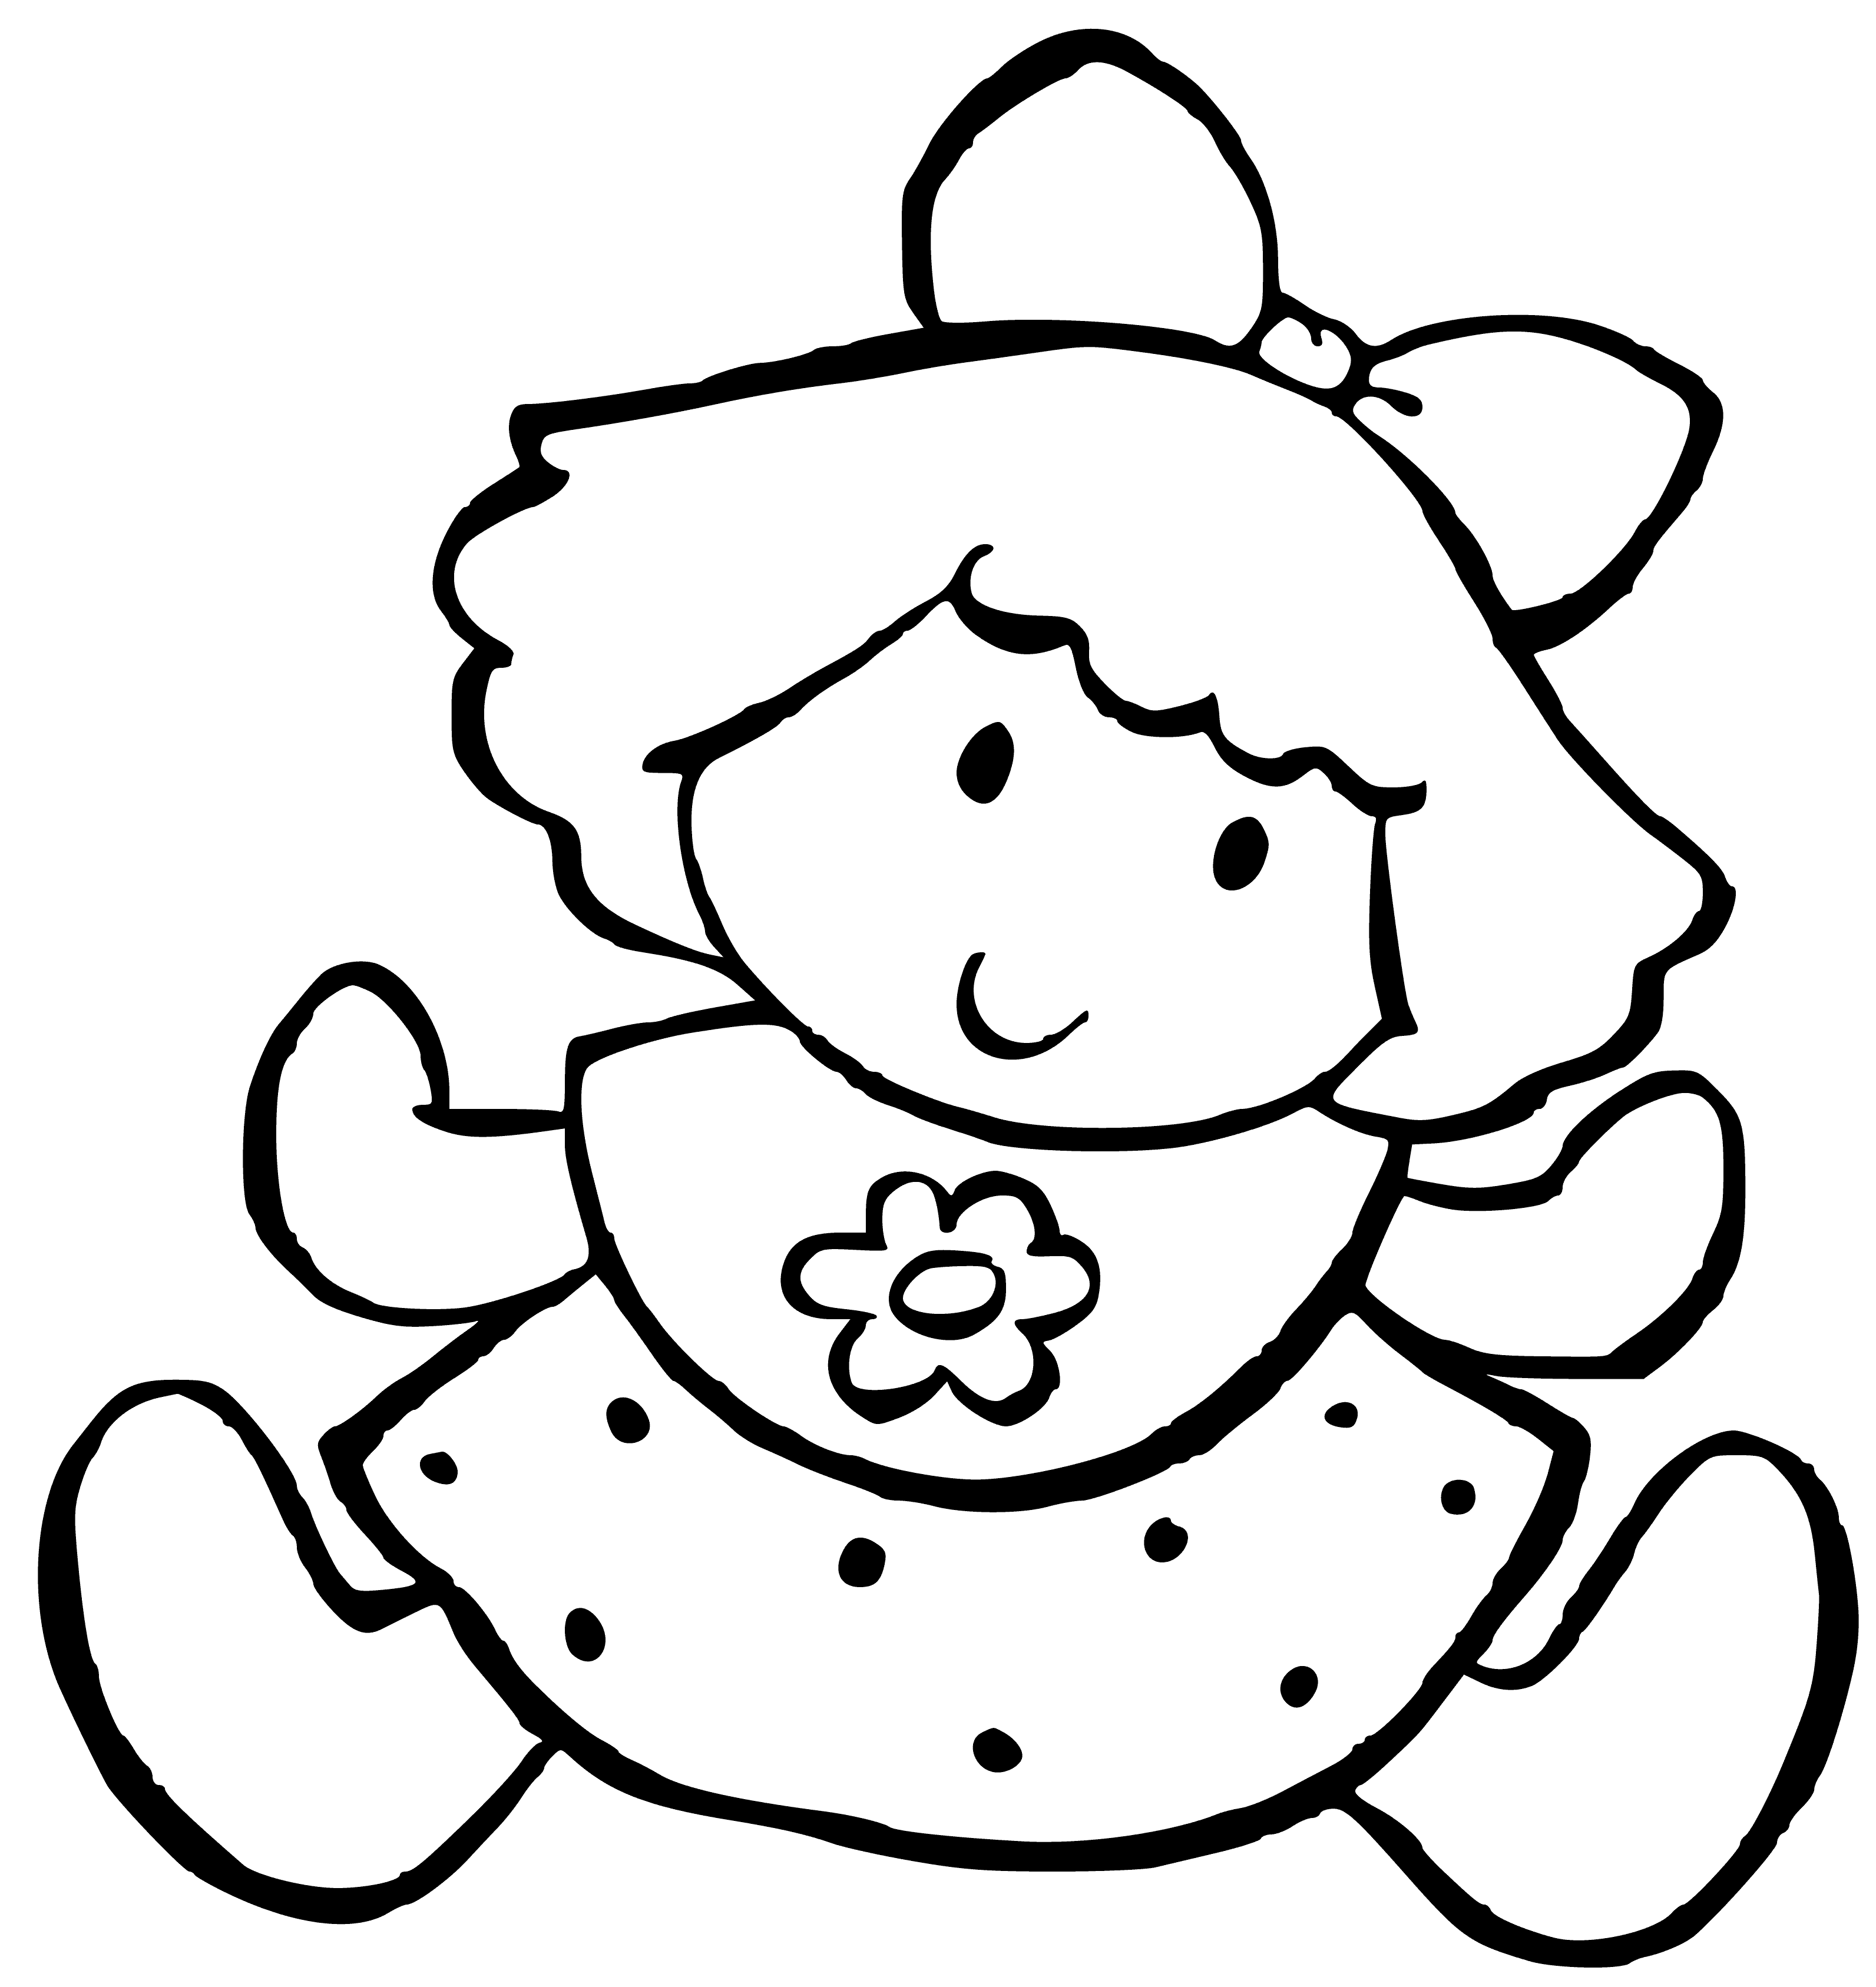 coloring page: Plastic doll 12" tall, blonde hair/blue eyes, white body wearing pink dress with ruffle. No arms/legs.